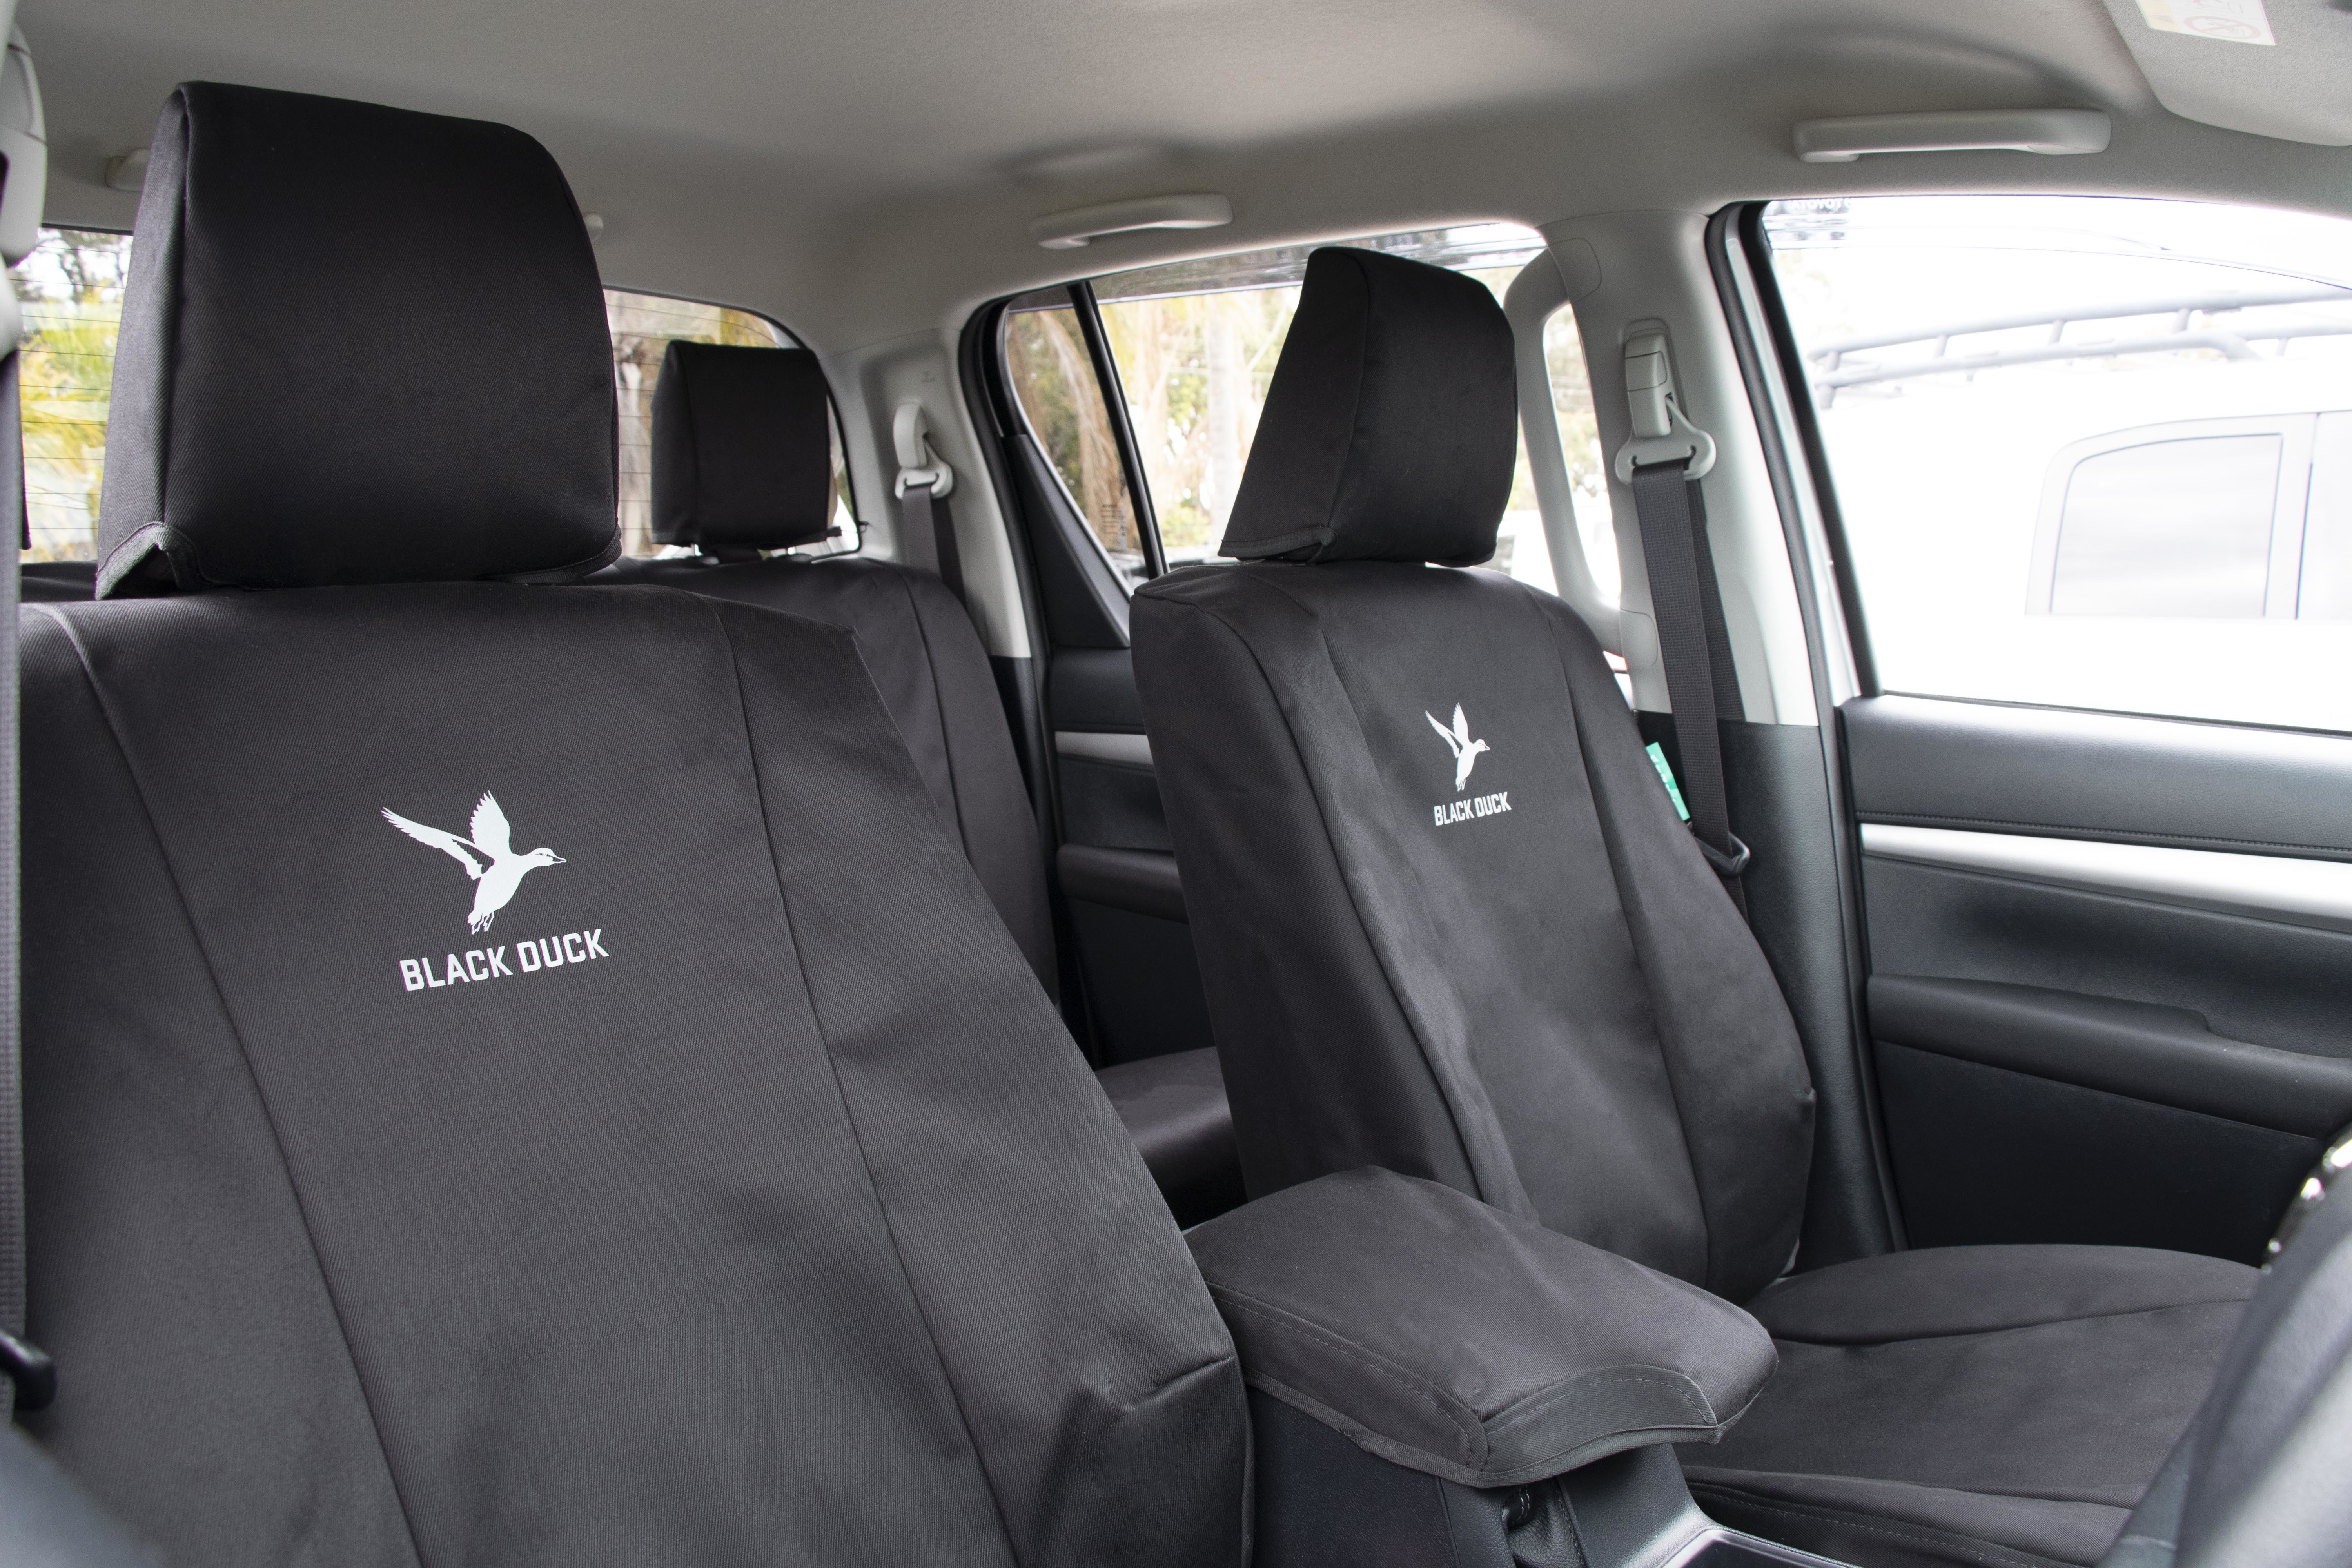 Toyota HiLux seat covers